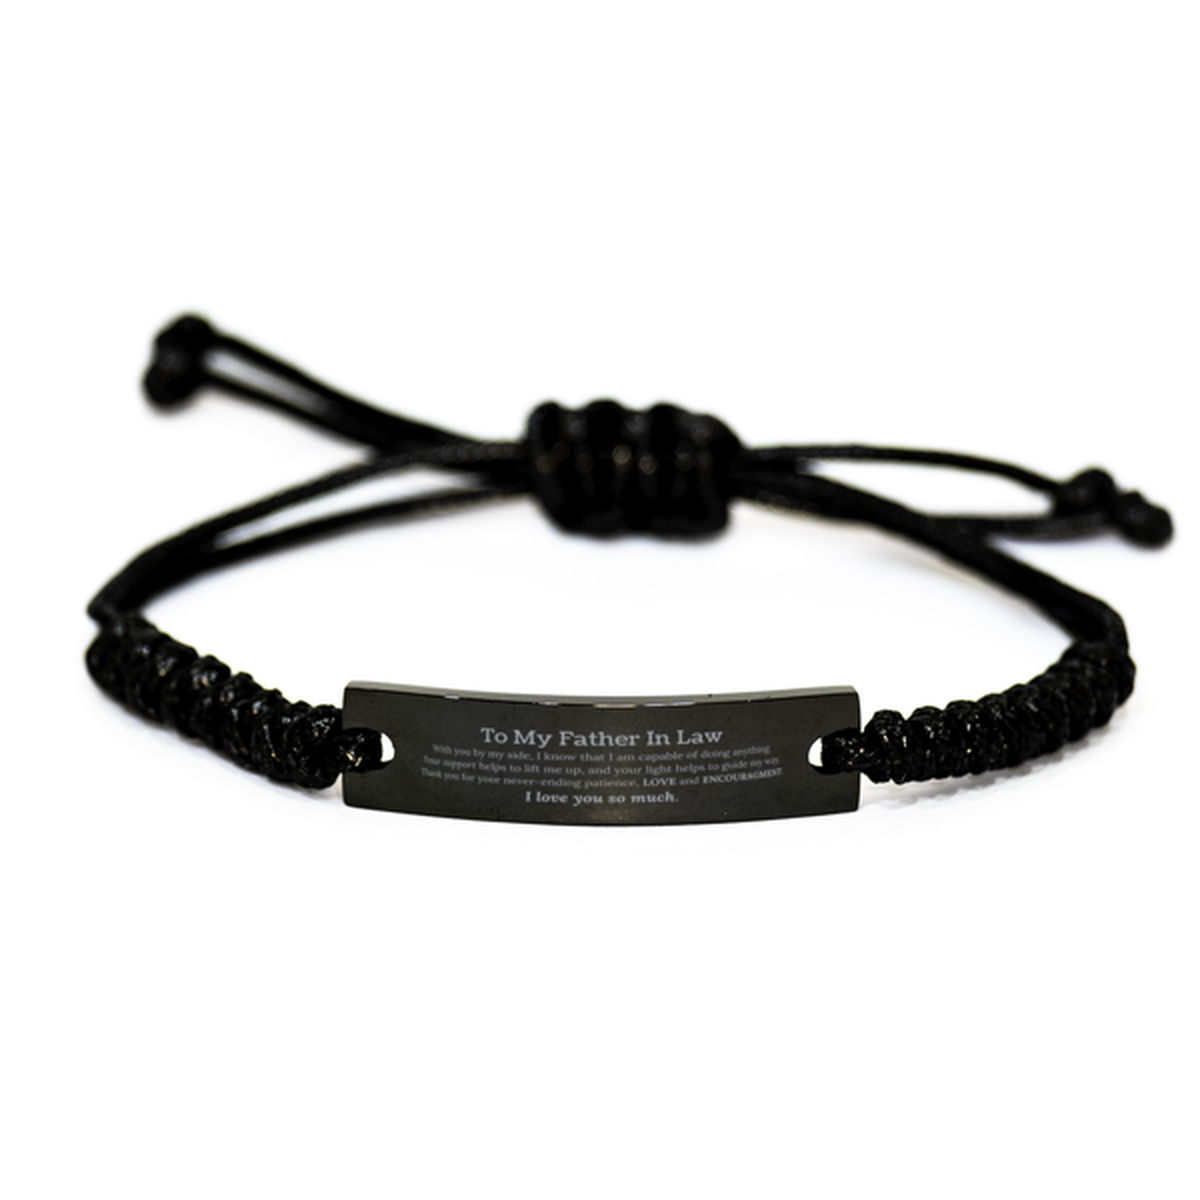 Appreciation Father In Law Black Rope Bracelet Gifts, To My Father In Law Birthday Christmas Wedding Keepsake Gifts for Father In Law With you by my side, I know that I am capable of doing anything. I love you so much